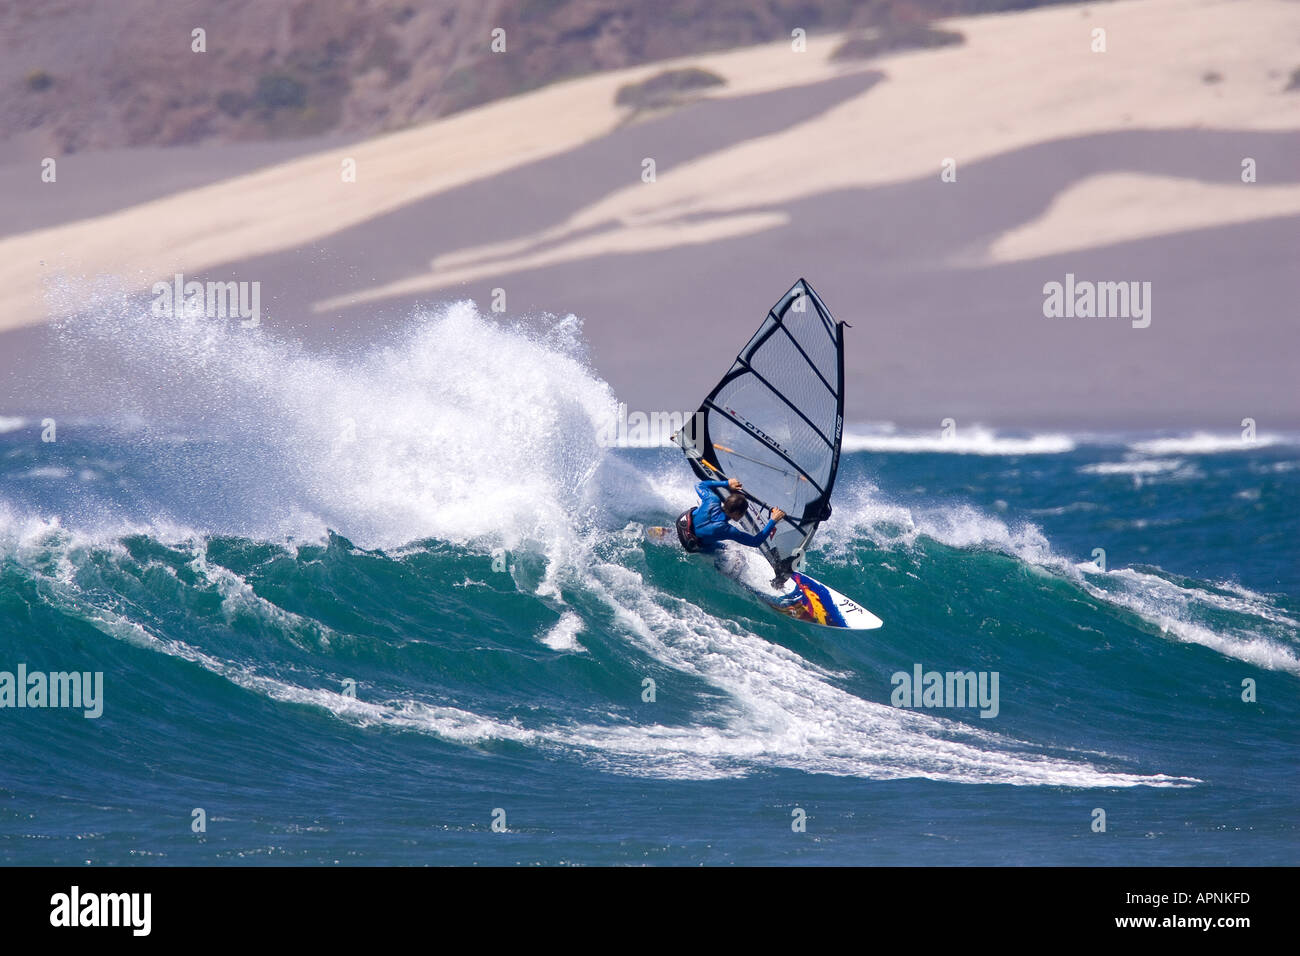 FRANCISCO GOYA WINDSURFING ACTION IN CHILE Stock Photo